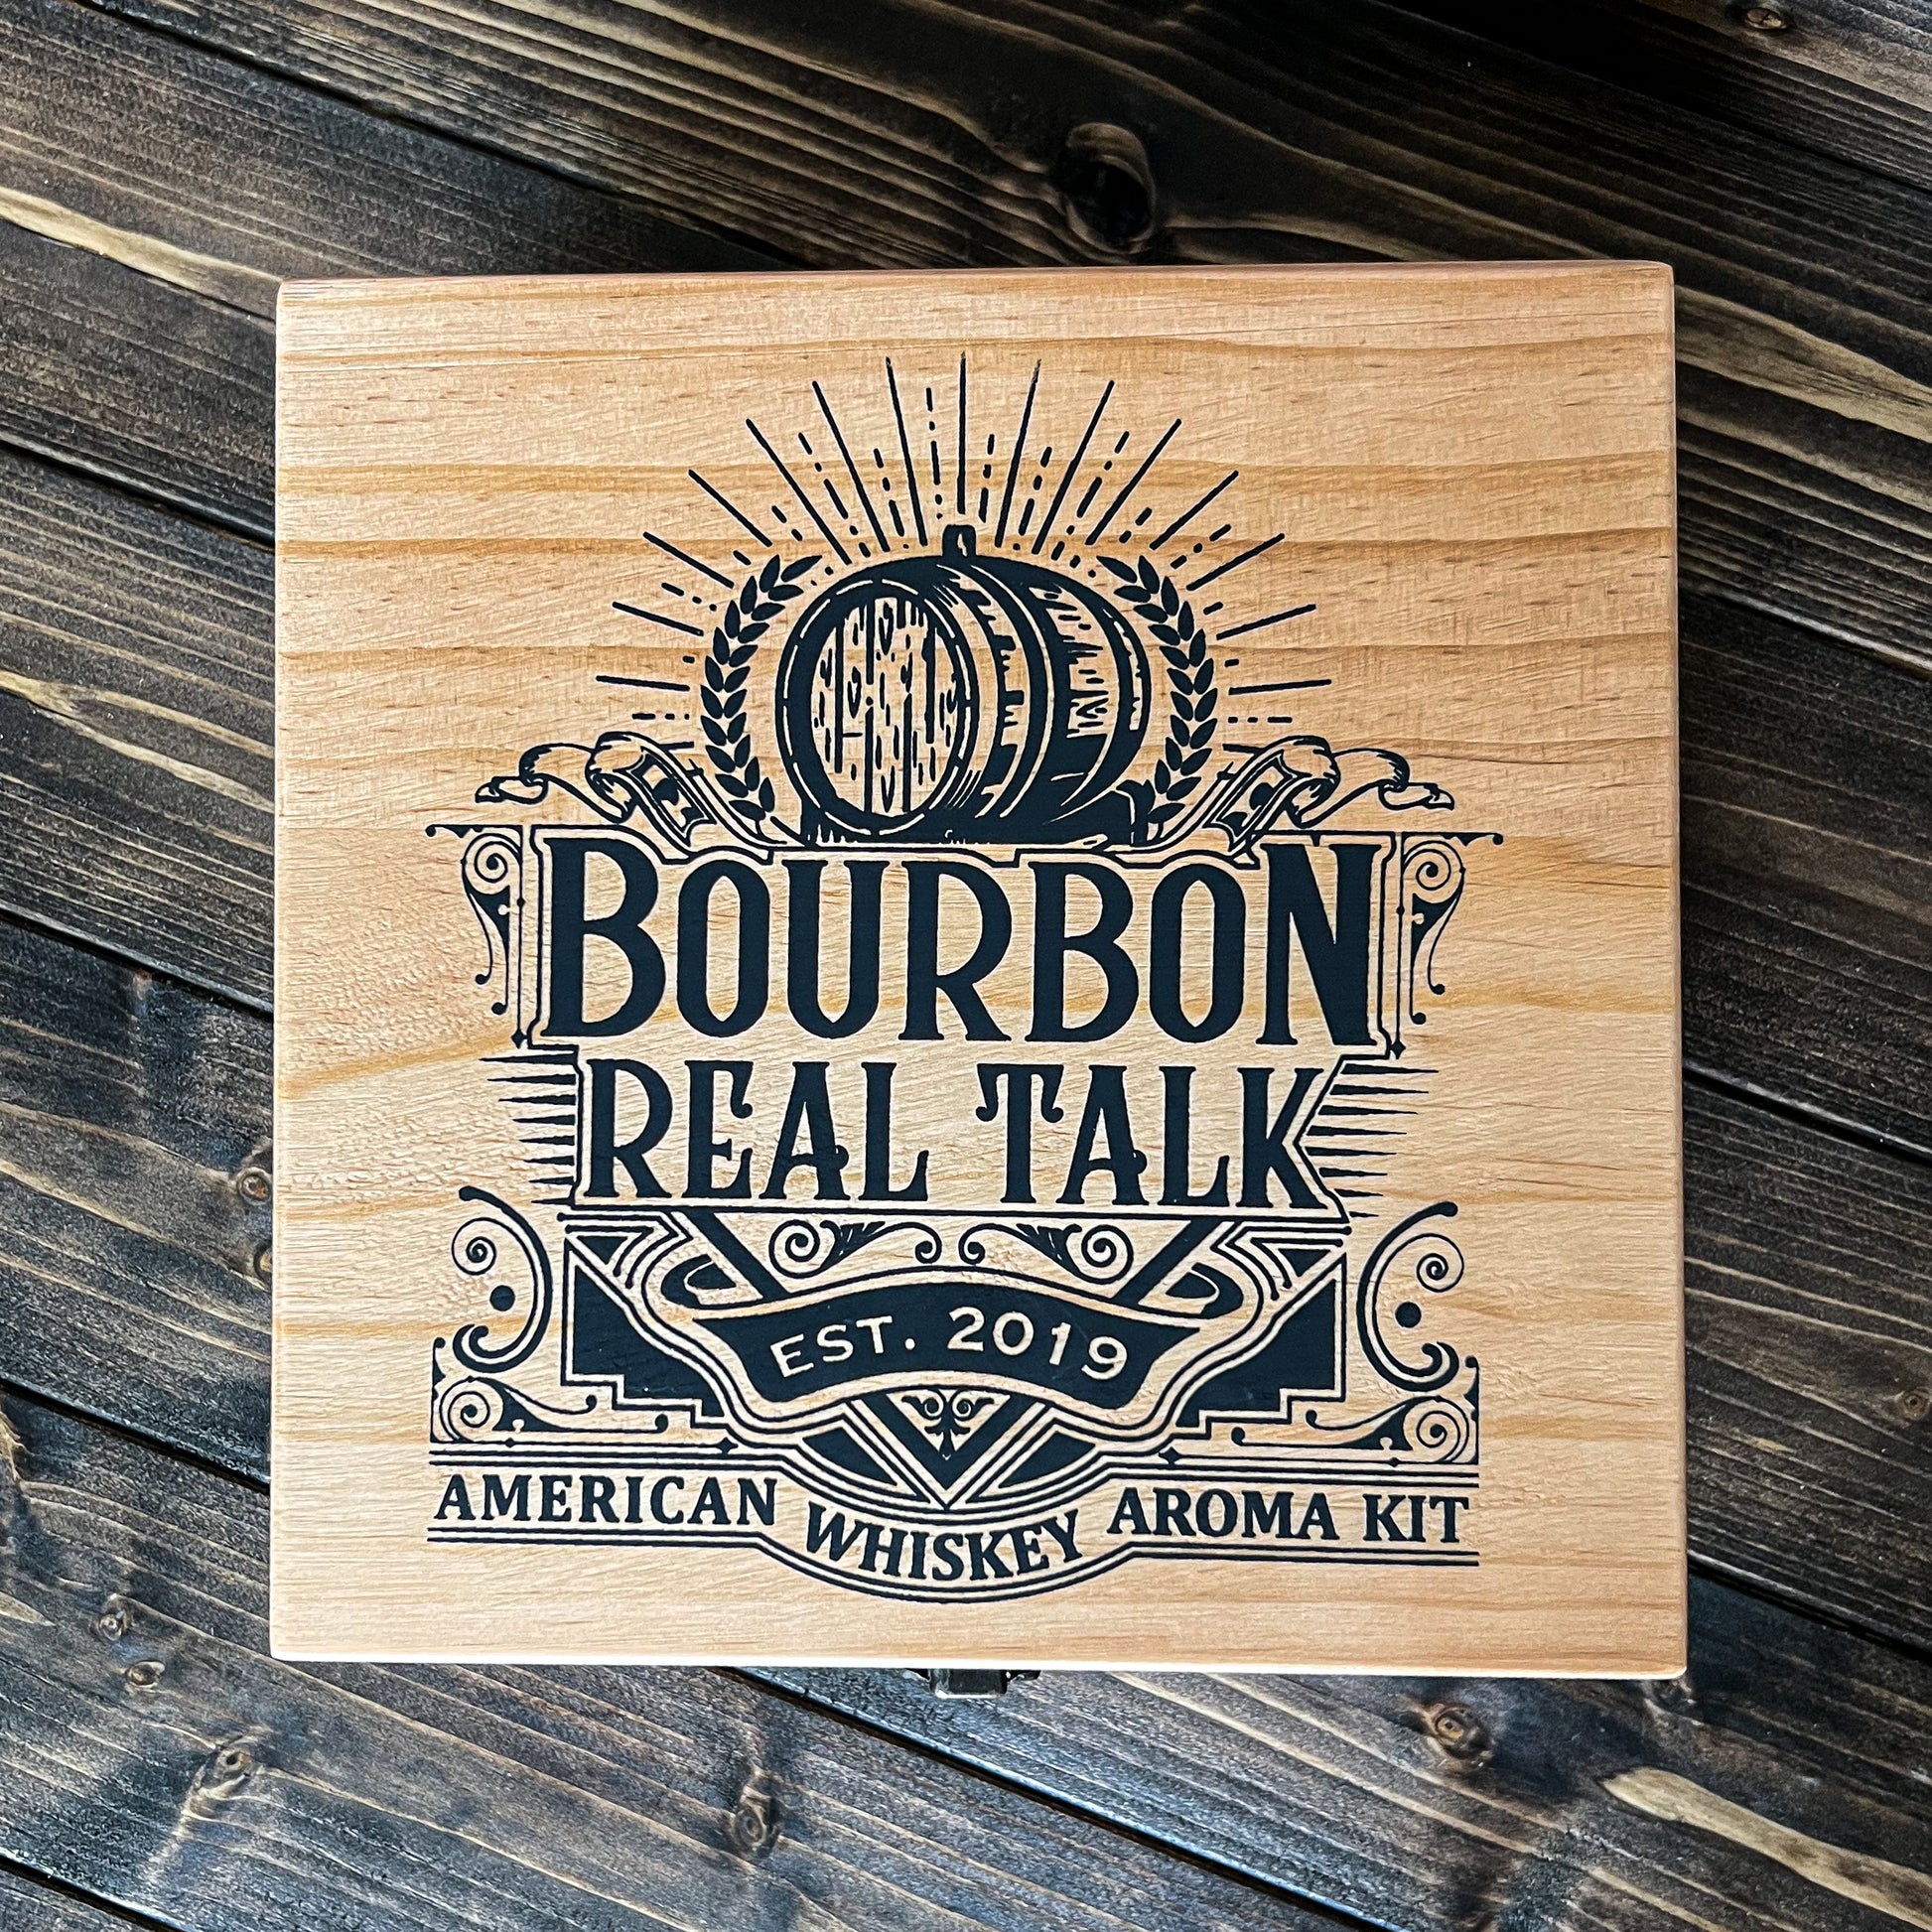 Top photo of the American Whiskey Aroma Kit, with the logo in black paint on light wood box